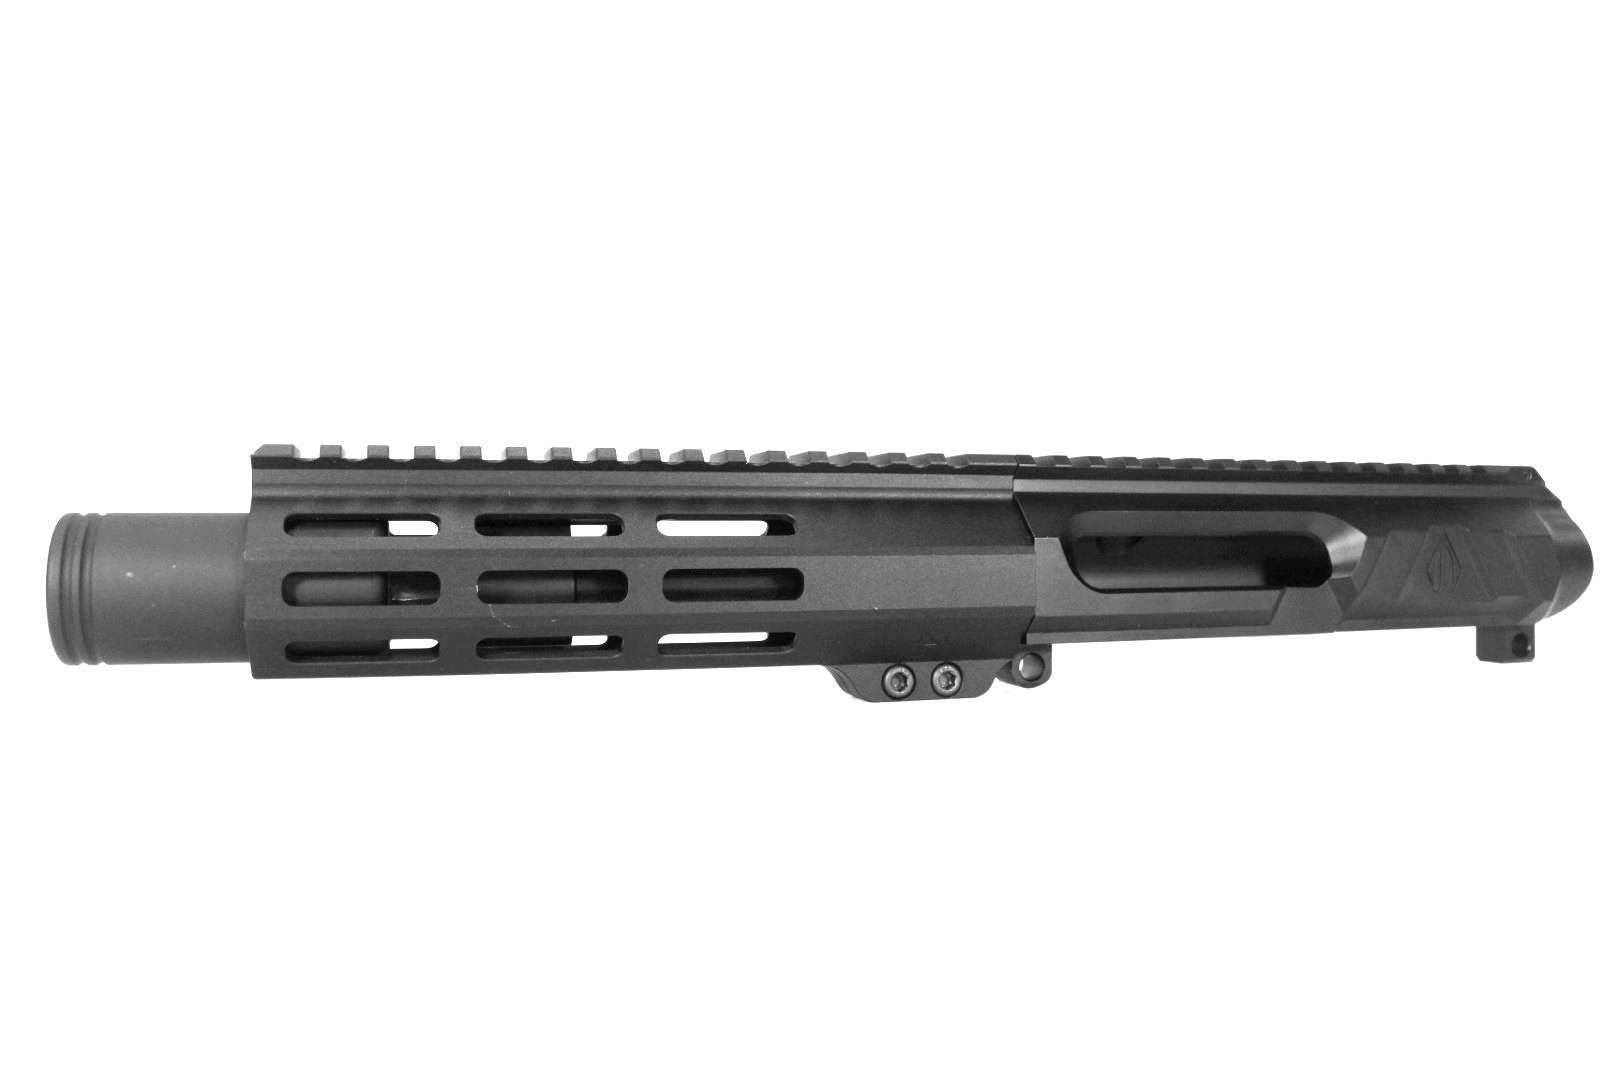 6 inch AR-15 LEFT HANDED AR-15 Non Reciprocating Side Charging 300 Blackout Pistol Melonite Upper w/Can